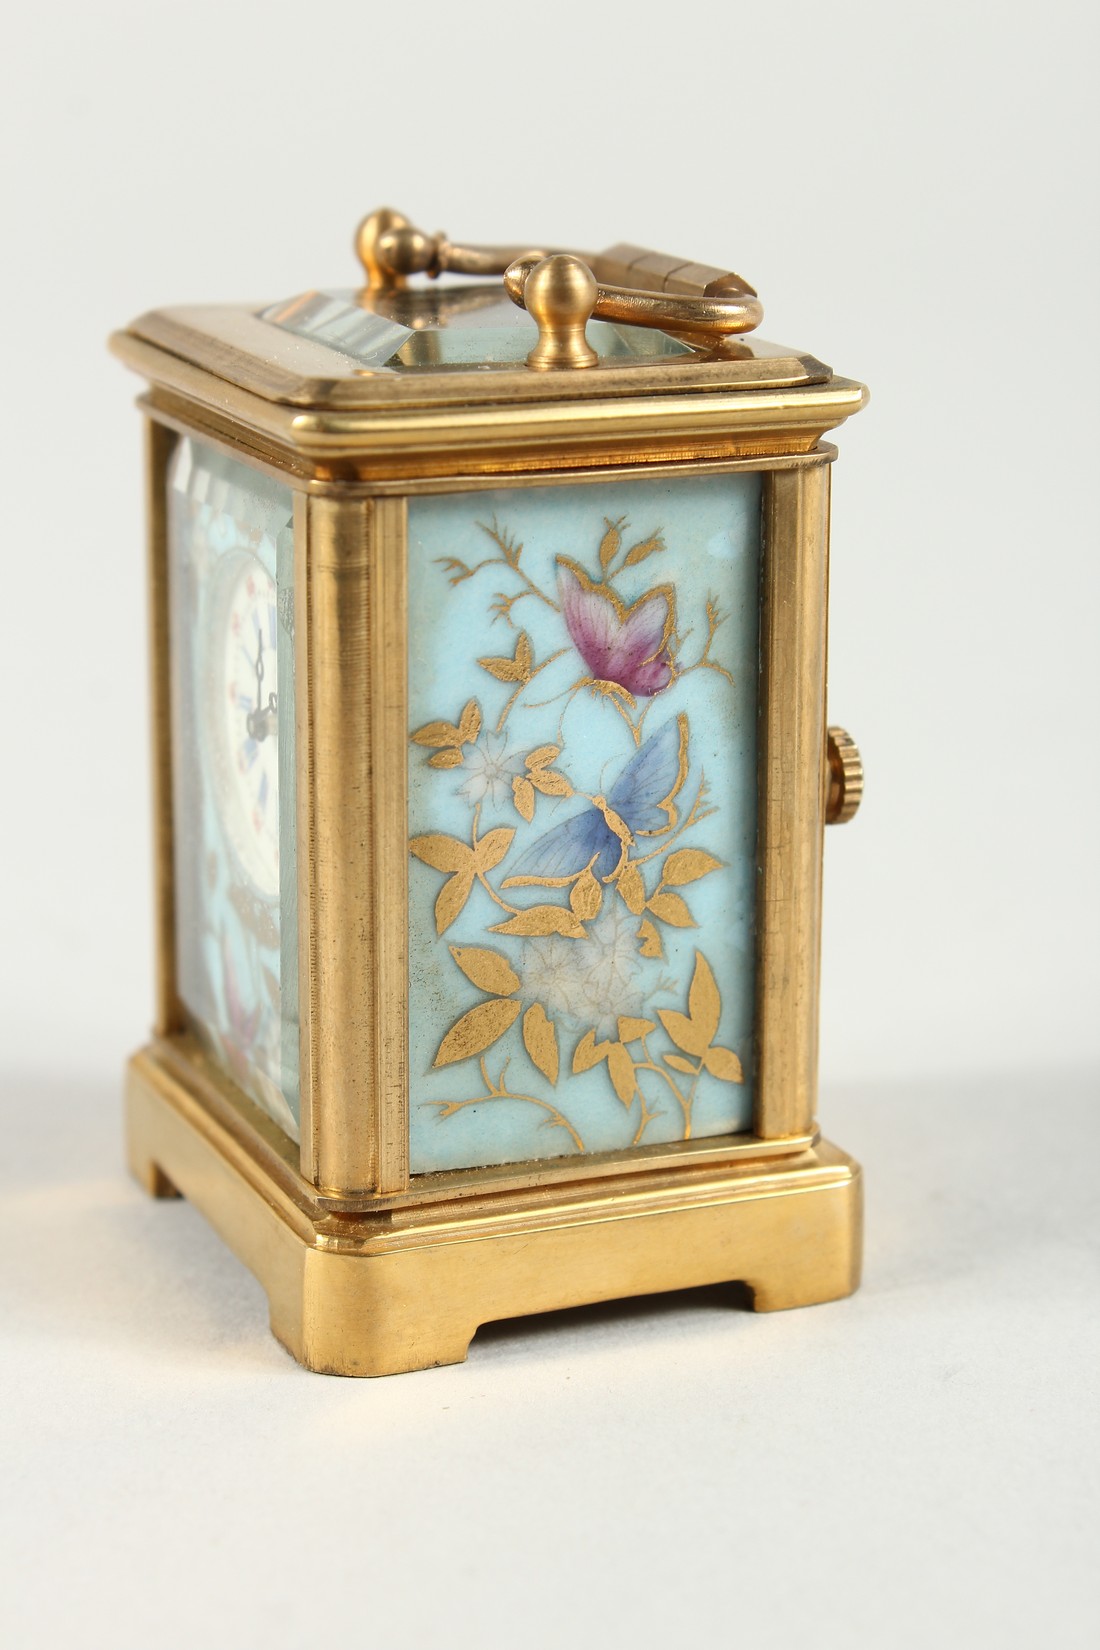 A MINIATURE SEVRES CARRIAGE CLOCK with flora porcelain panels. 2.25ins high. - Image 2 of 7